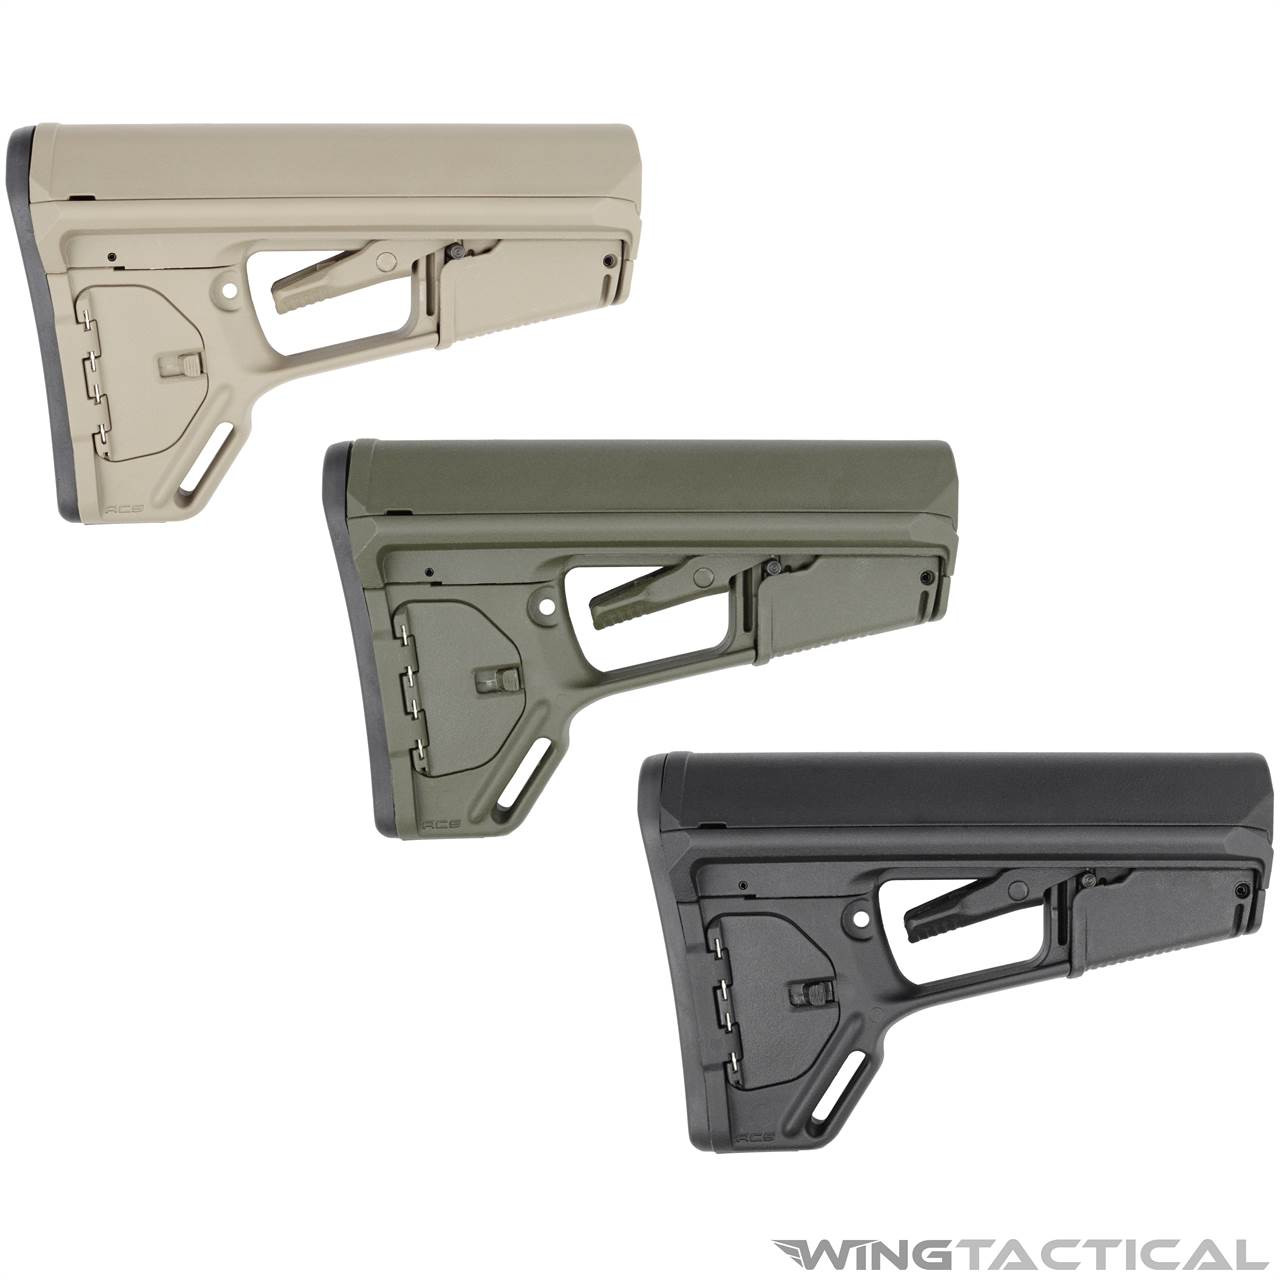 Magpul ACS-L Stock for Mil-Spec Carbine Buffer Tube - MAG378 